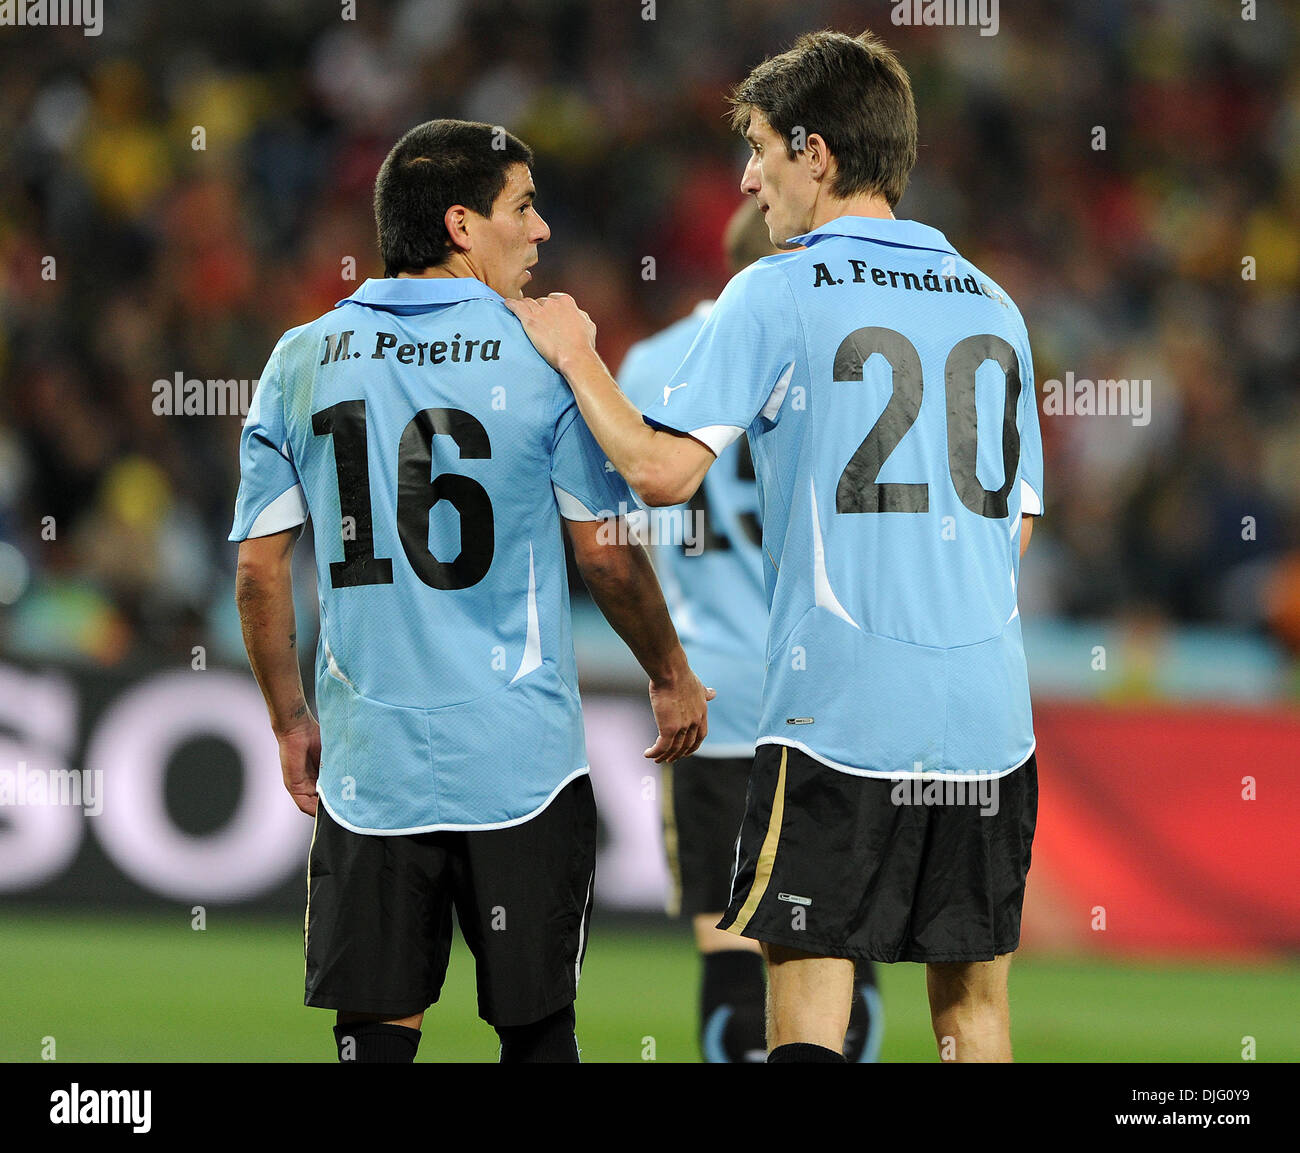 July 02, 2010 - Johannesburg, South Africa - Maximiliano Pereira of Uruguay speaks with Alvaro Fernandez during the 2010 FIFA World Cup Quarter Final soccer match between Uruguay and Ghana at Soccer City Stadium on June 02, 2010 in Johannesburg, South Africa. (Credit Image: © Luca Ghidoni/ZUMApress.com) Stock Photo